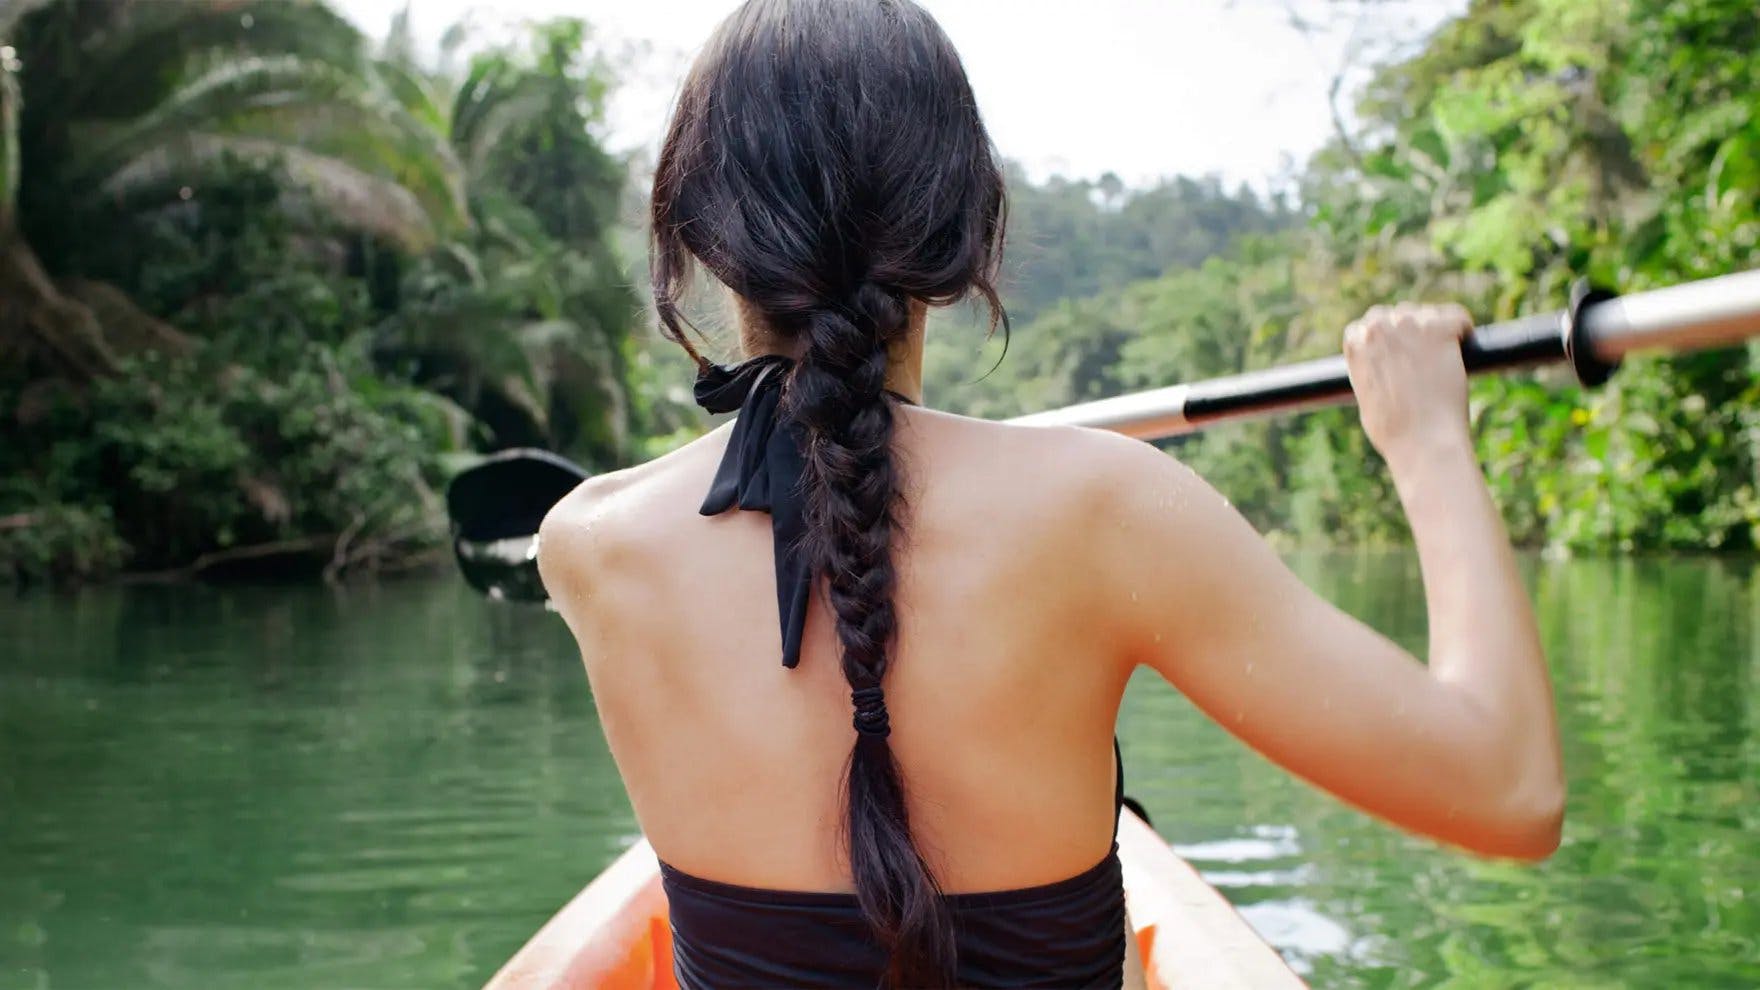 Woman with long, black hair in a braid kayaking down a river with her back turned to the camera